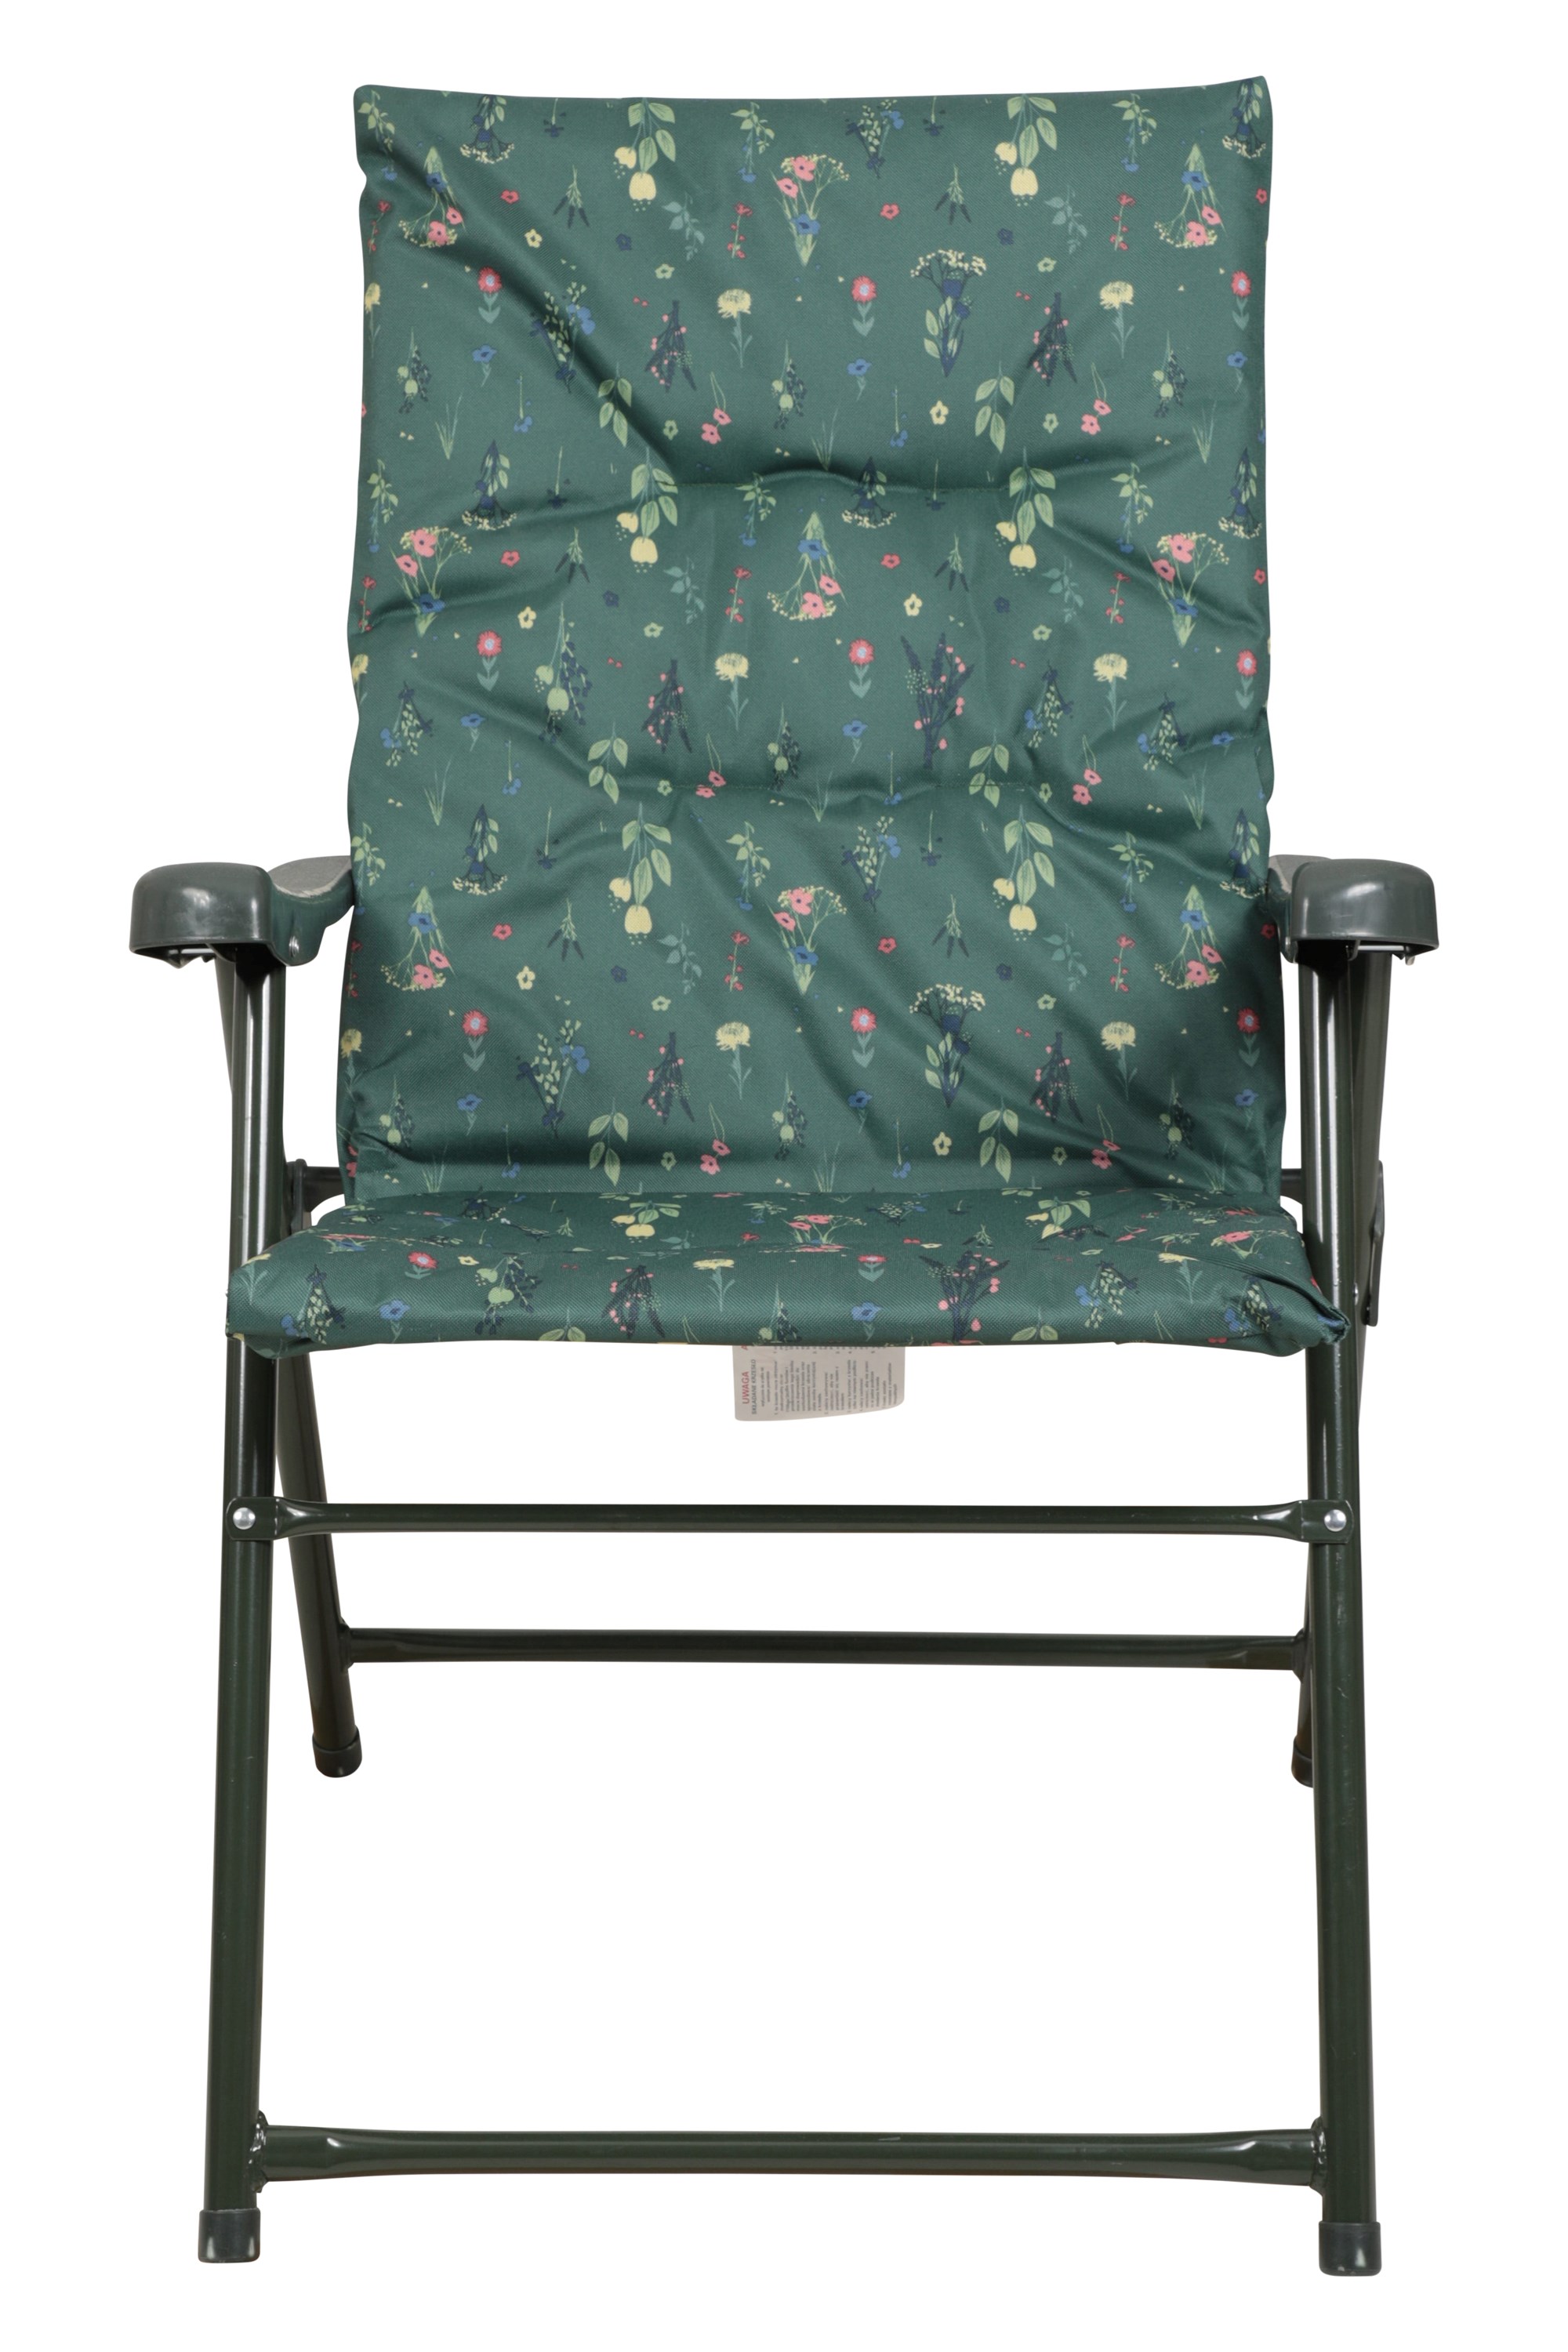 Mountain Warehouse Folding Chairs Lightweight Designed in Steel and Polyester 